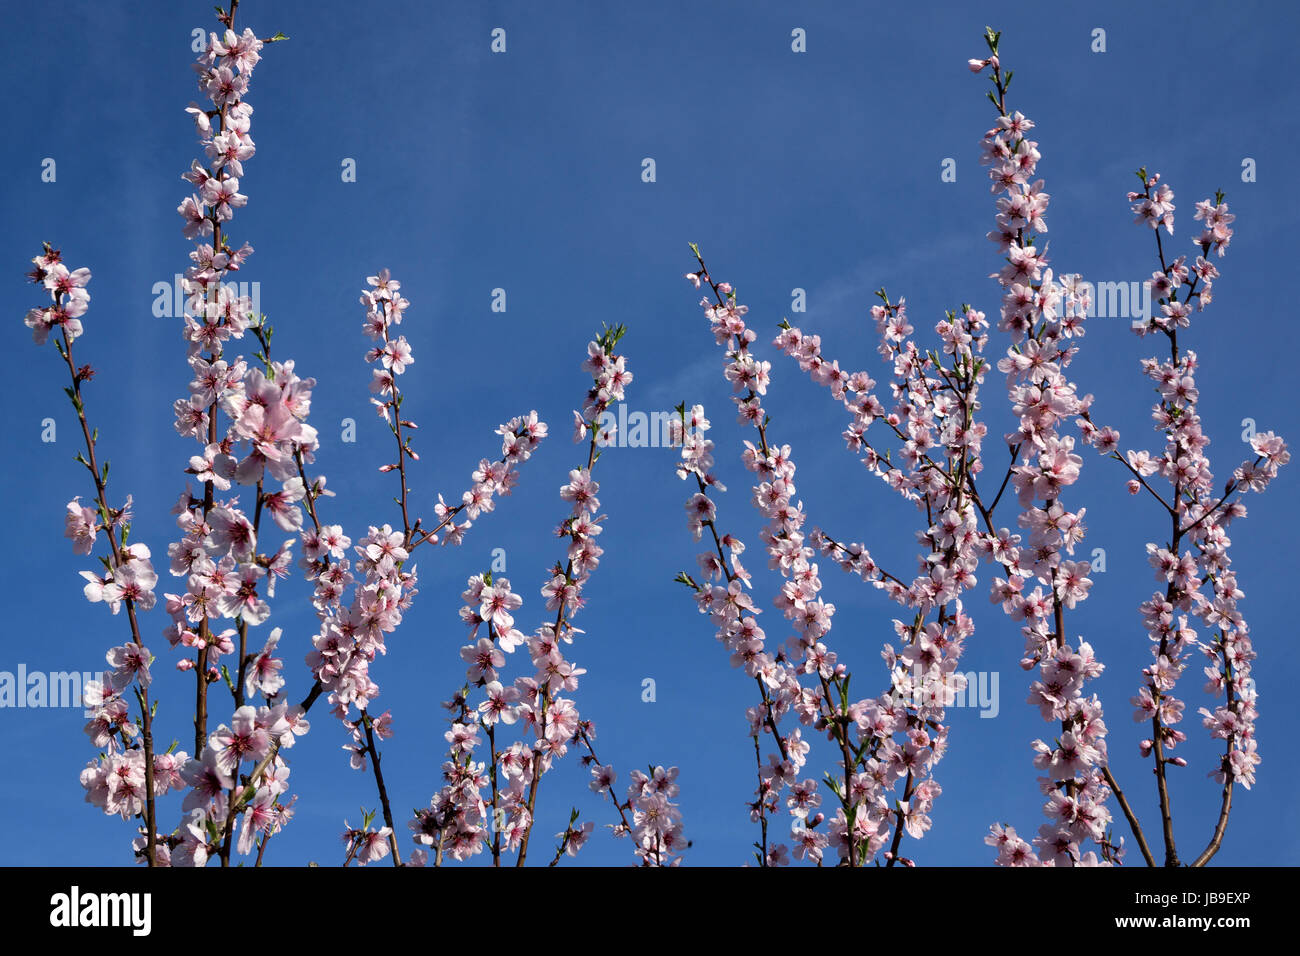 Almond blossoms (Prunus dulcis) on branch, blossoming almond tree, Baden-Württemberg, Germany Stock Photo